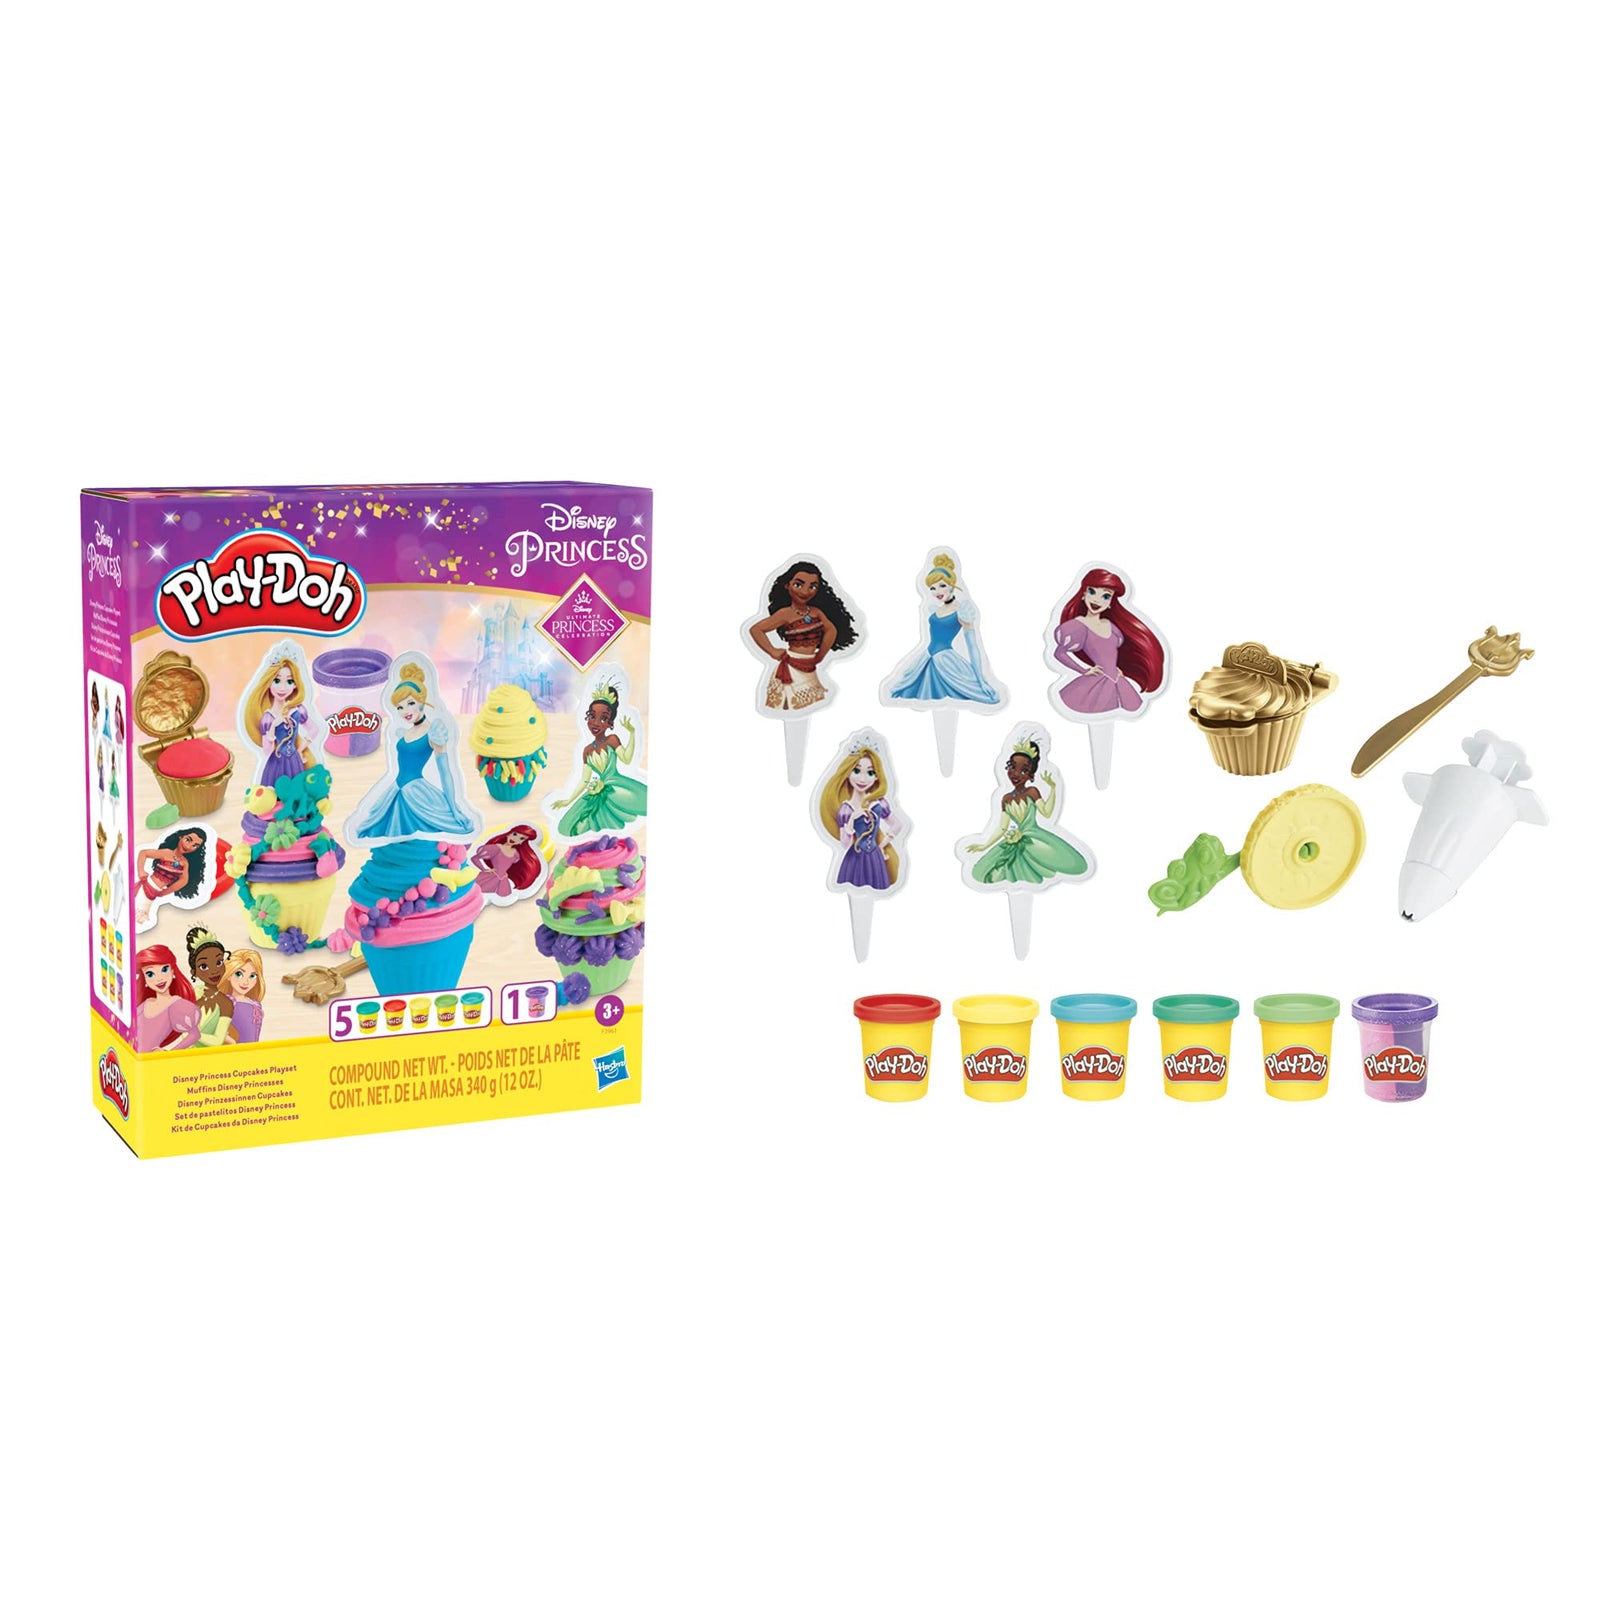 Play-Doh Disney Princess Cupcakes Playset Arts and Crafts Toy for Kids 3 Years and Up with 6 Non-Toxic Cans Including Dual Sparkle